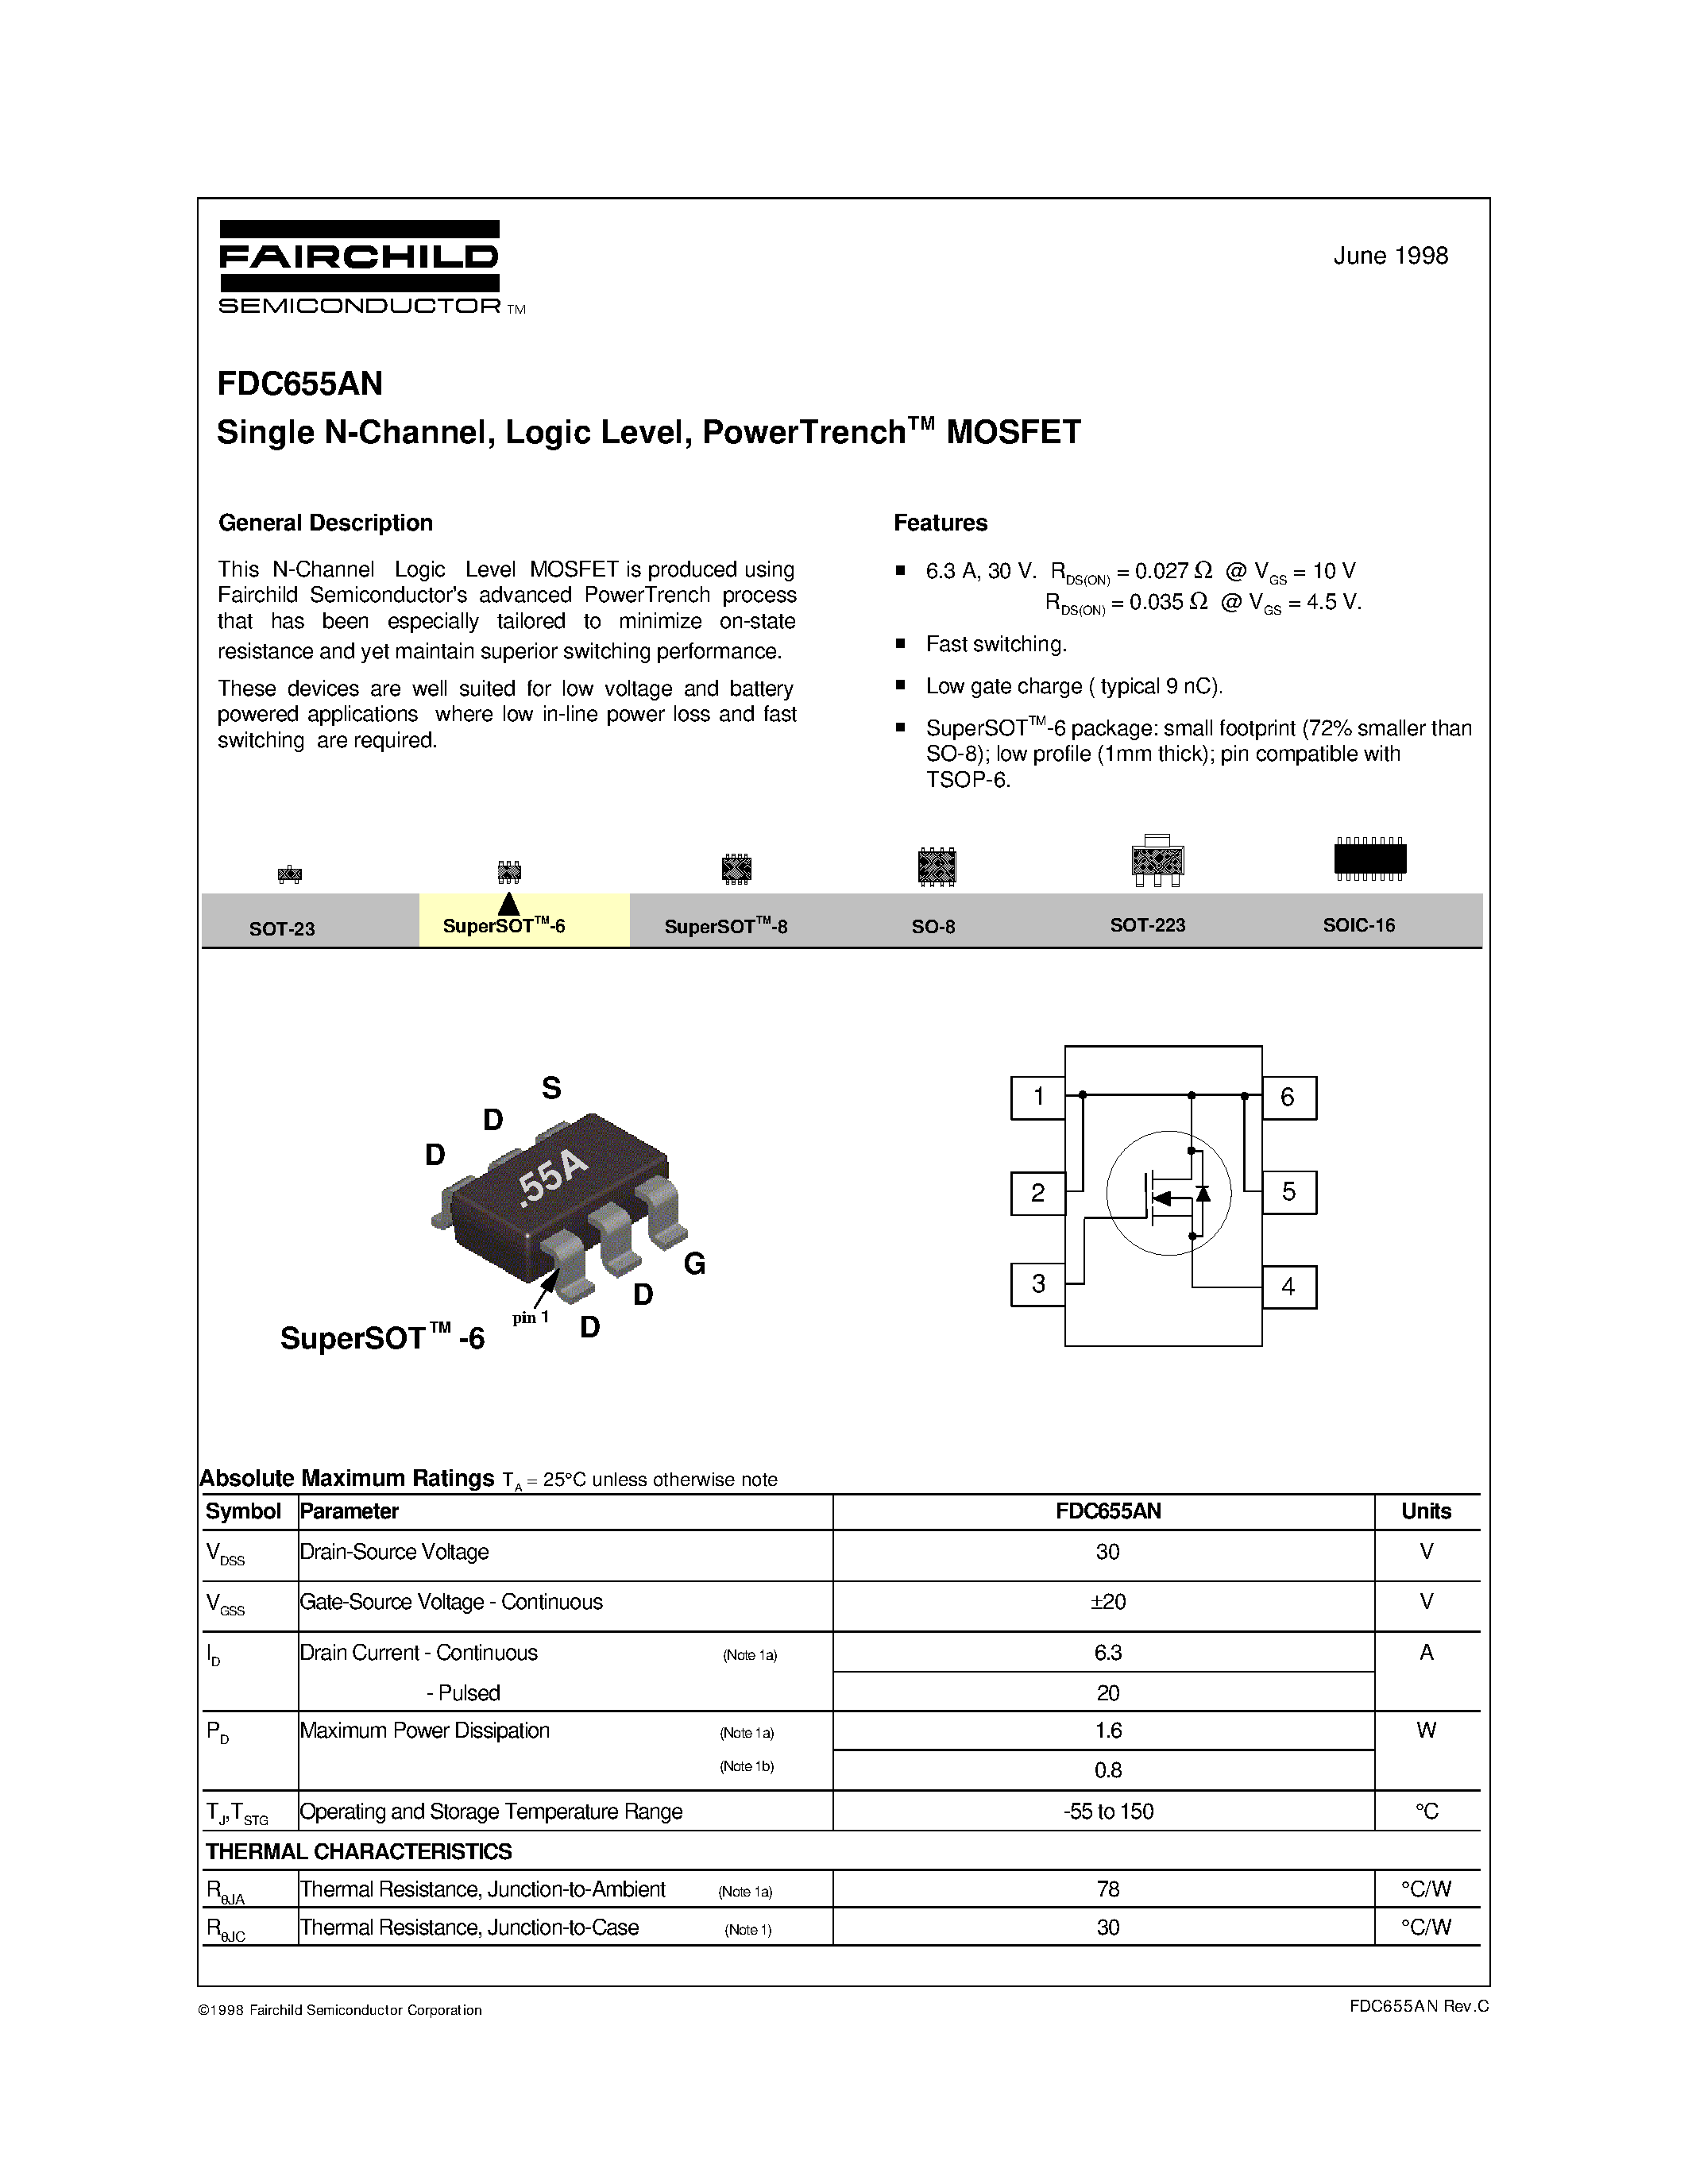 Datasheet FDC655AN - Single N-Channel/ Logic Level/ PowerTrenchTM MOSFET page 1